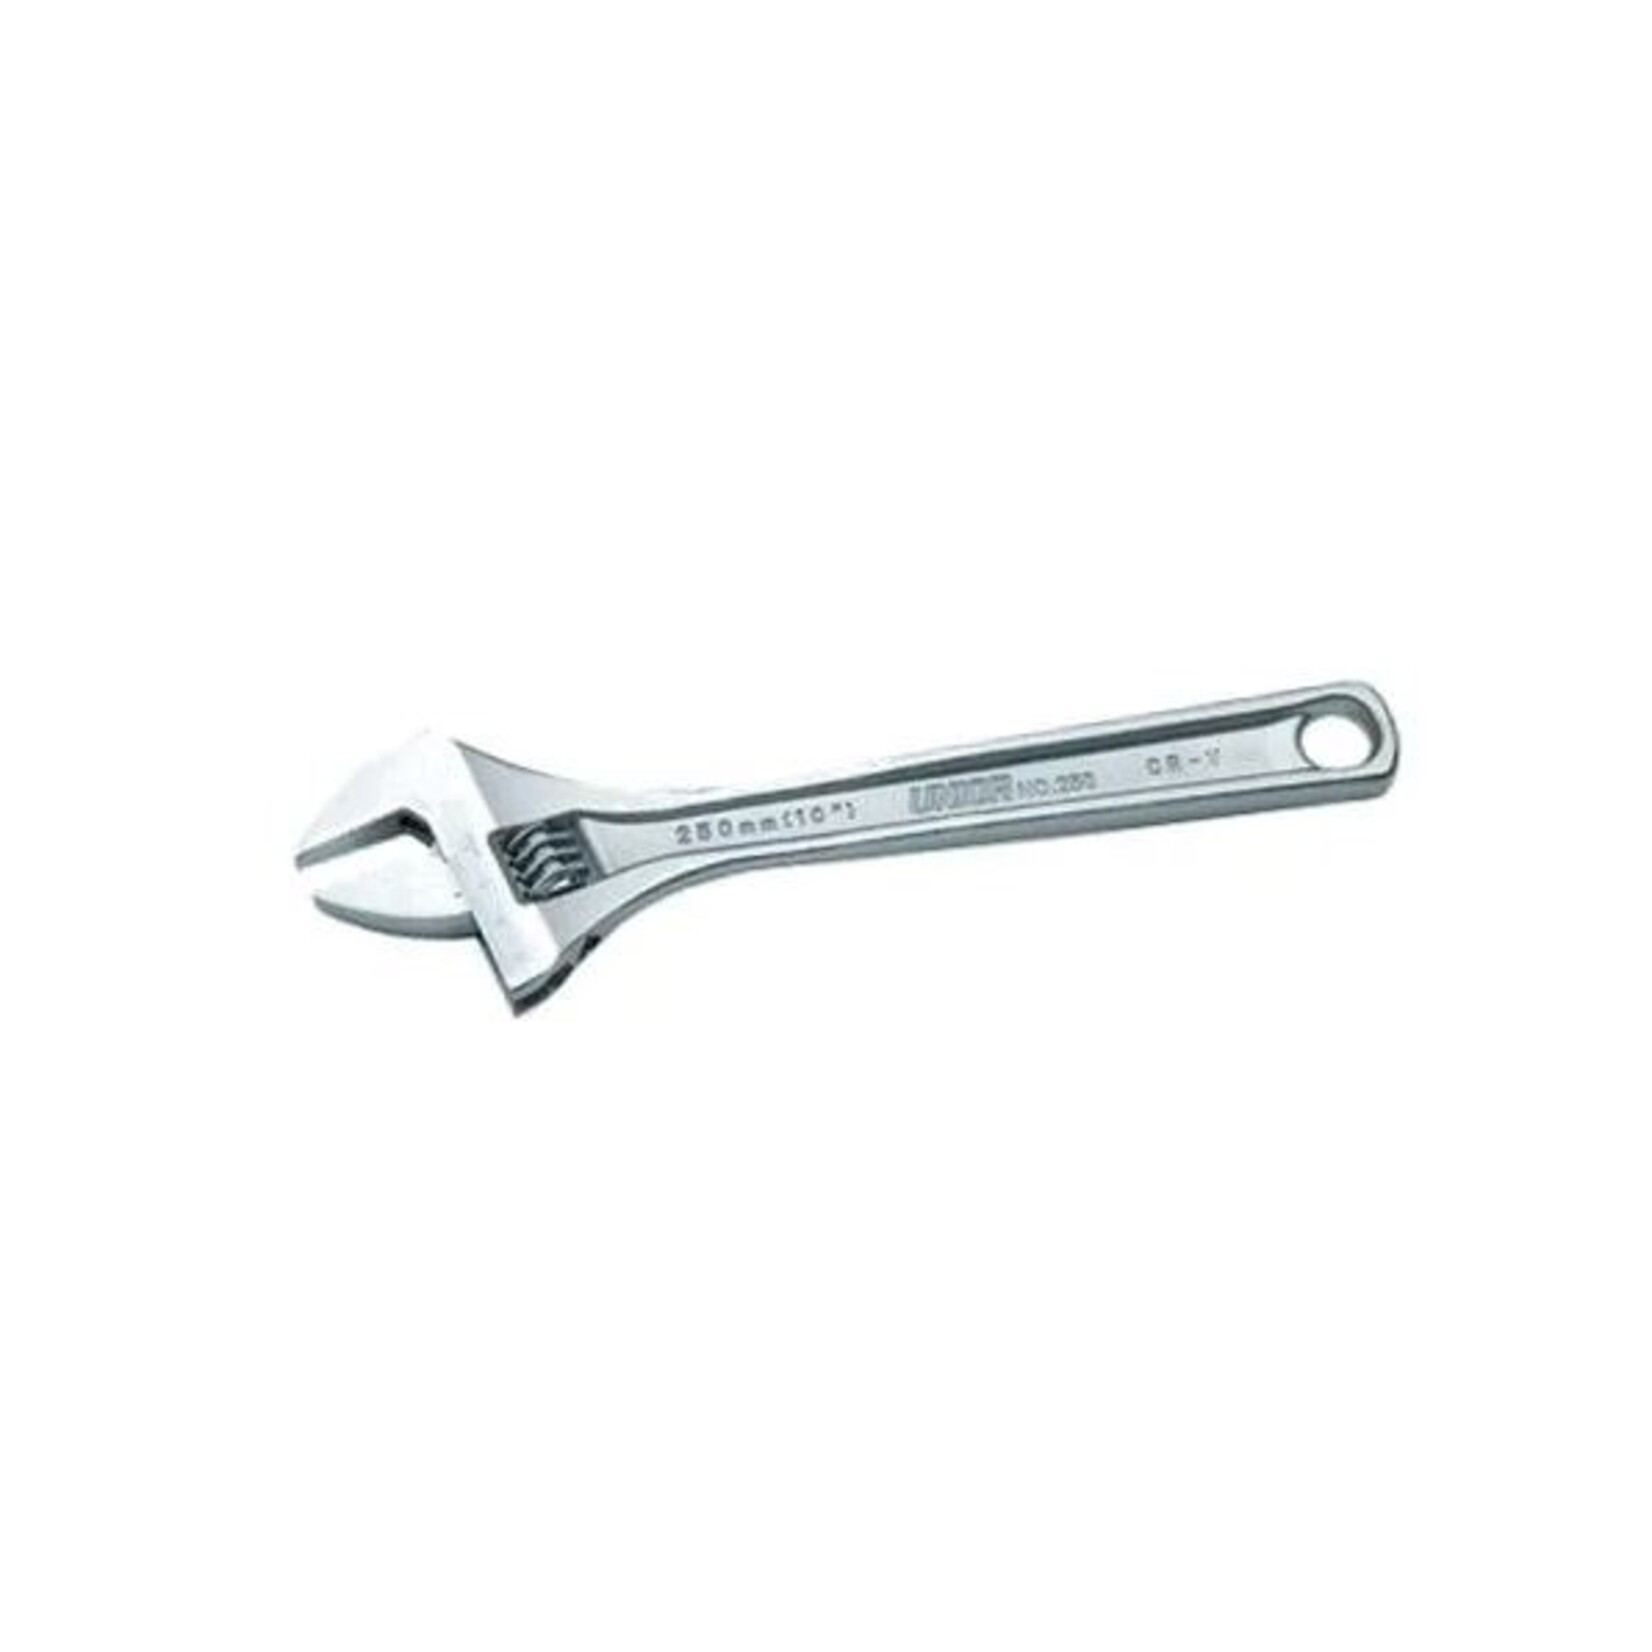 unior Unior Adjustable Wrench Hardened And Tempered Polished Head Bicycle Tool